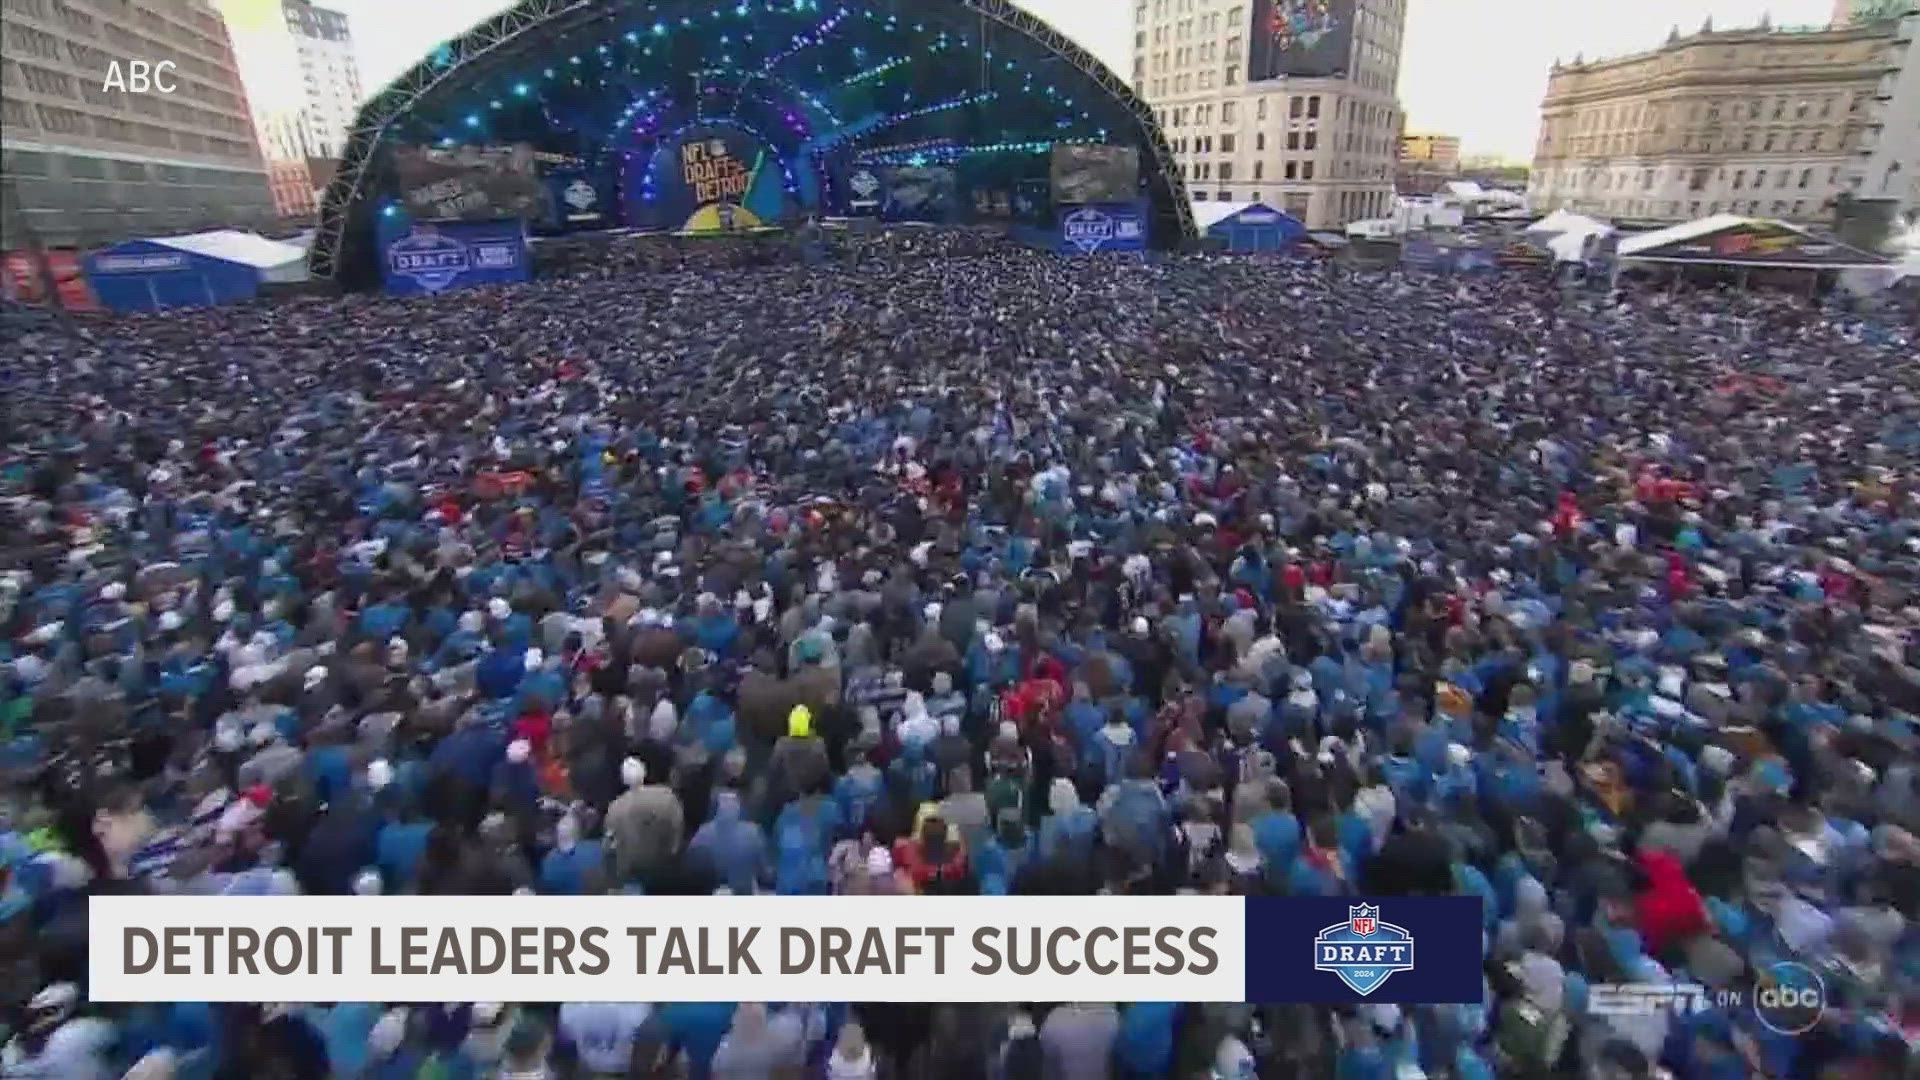 The Draft in Detroit had a record attendance of more than 275,000 unique visitors in downtown Detroit over three days.